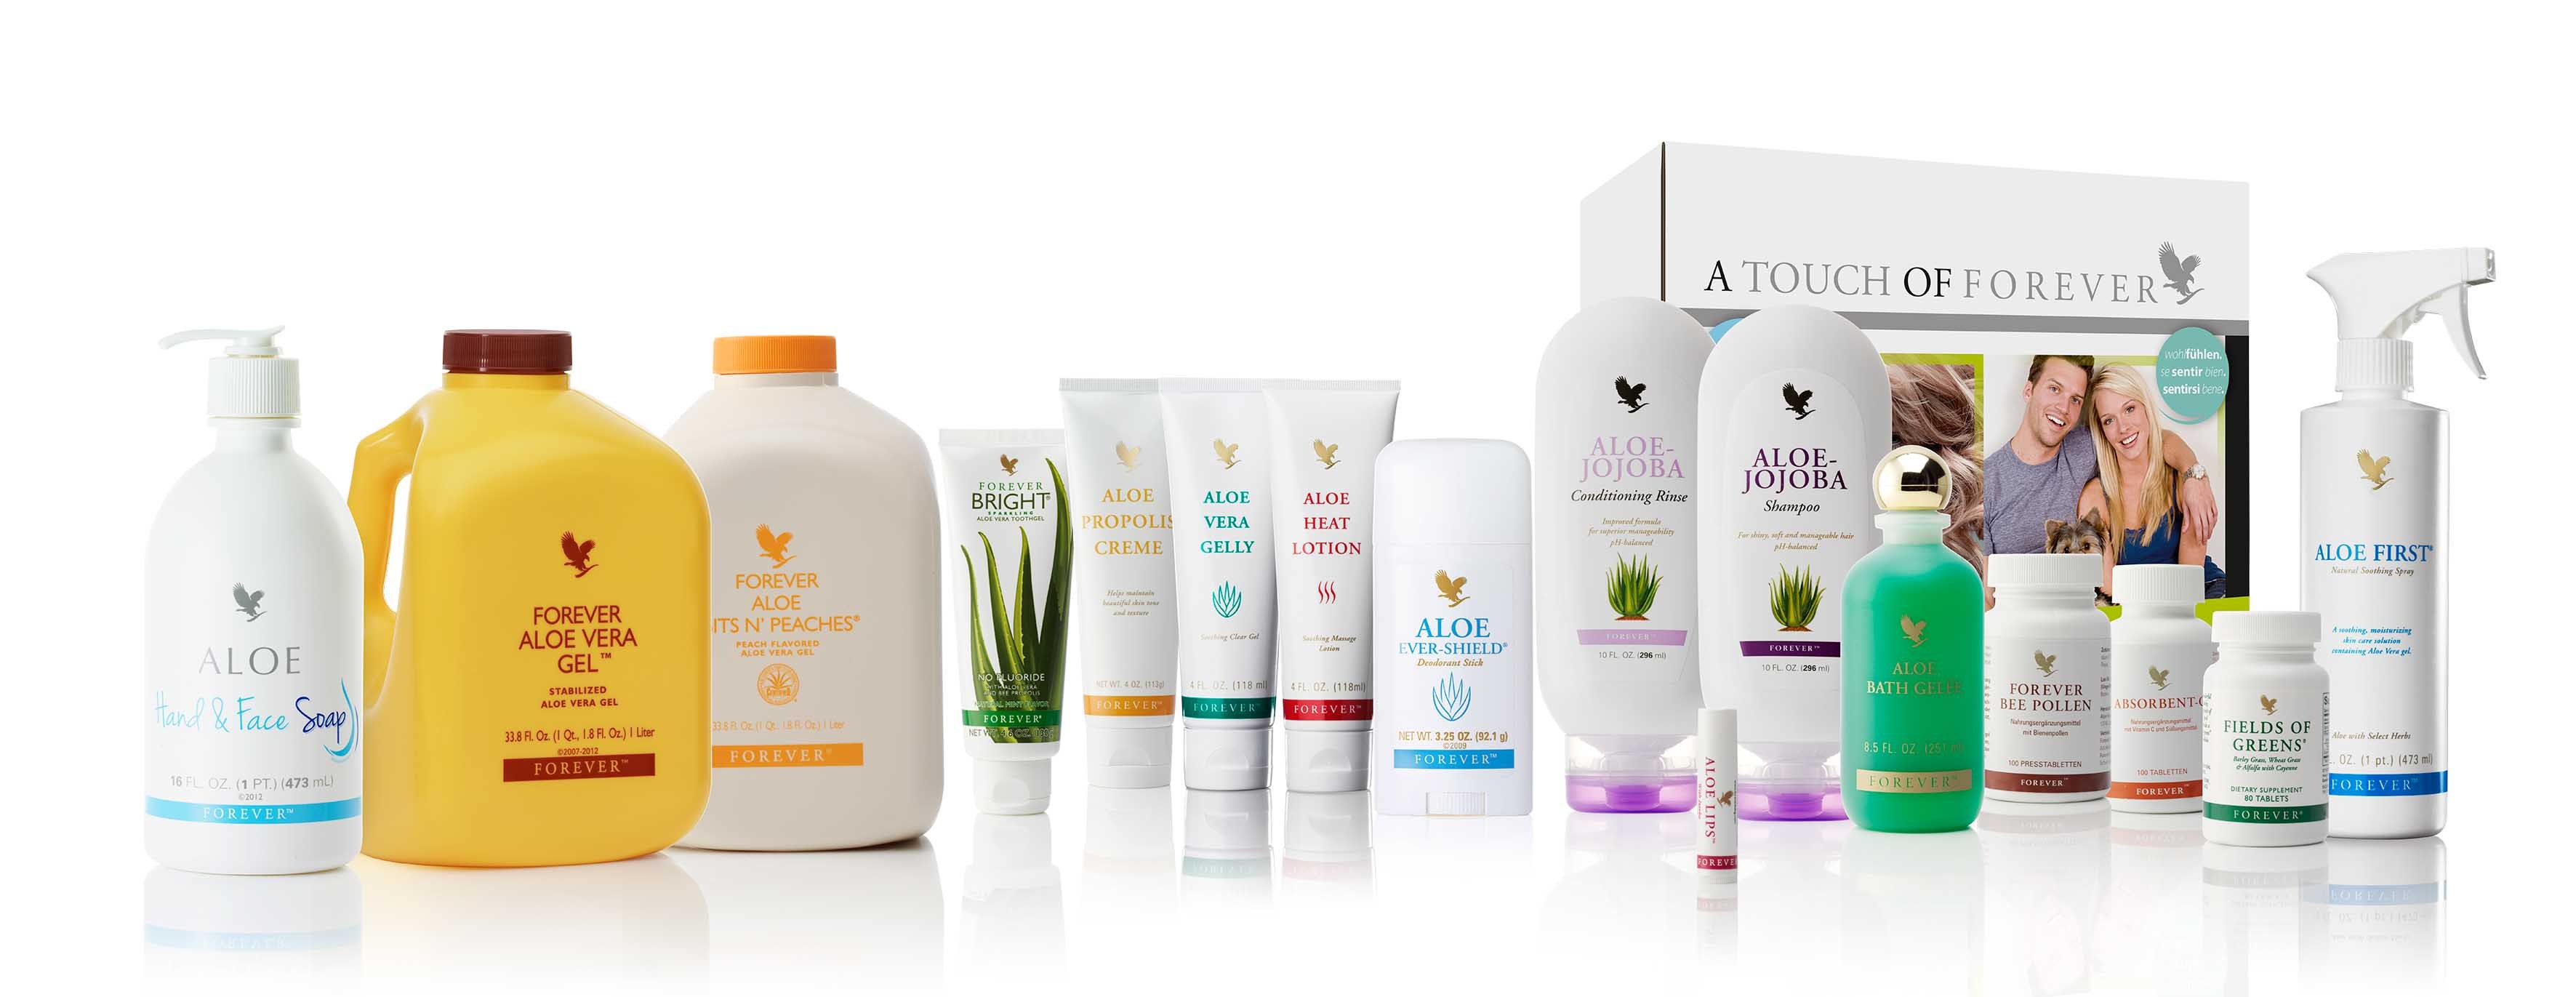 Forever Living Products California | Aloe Vera Products ...